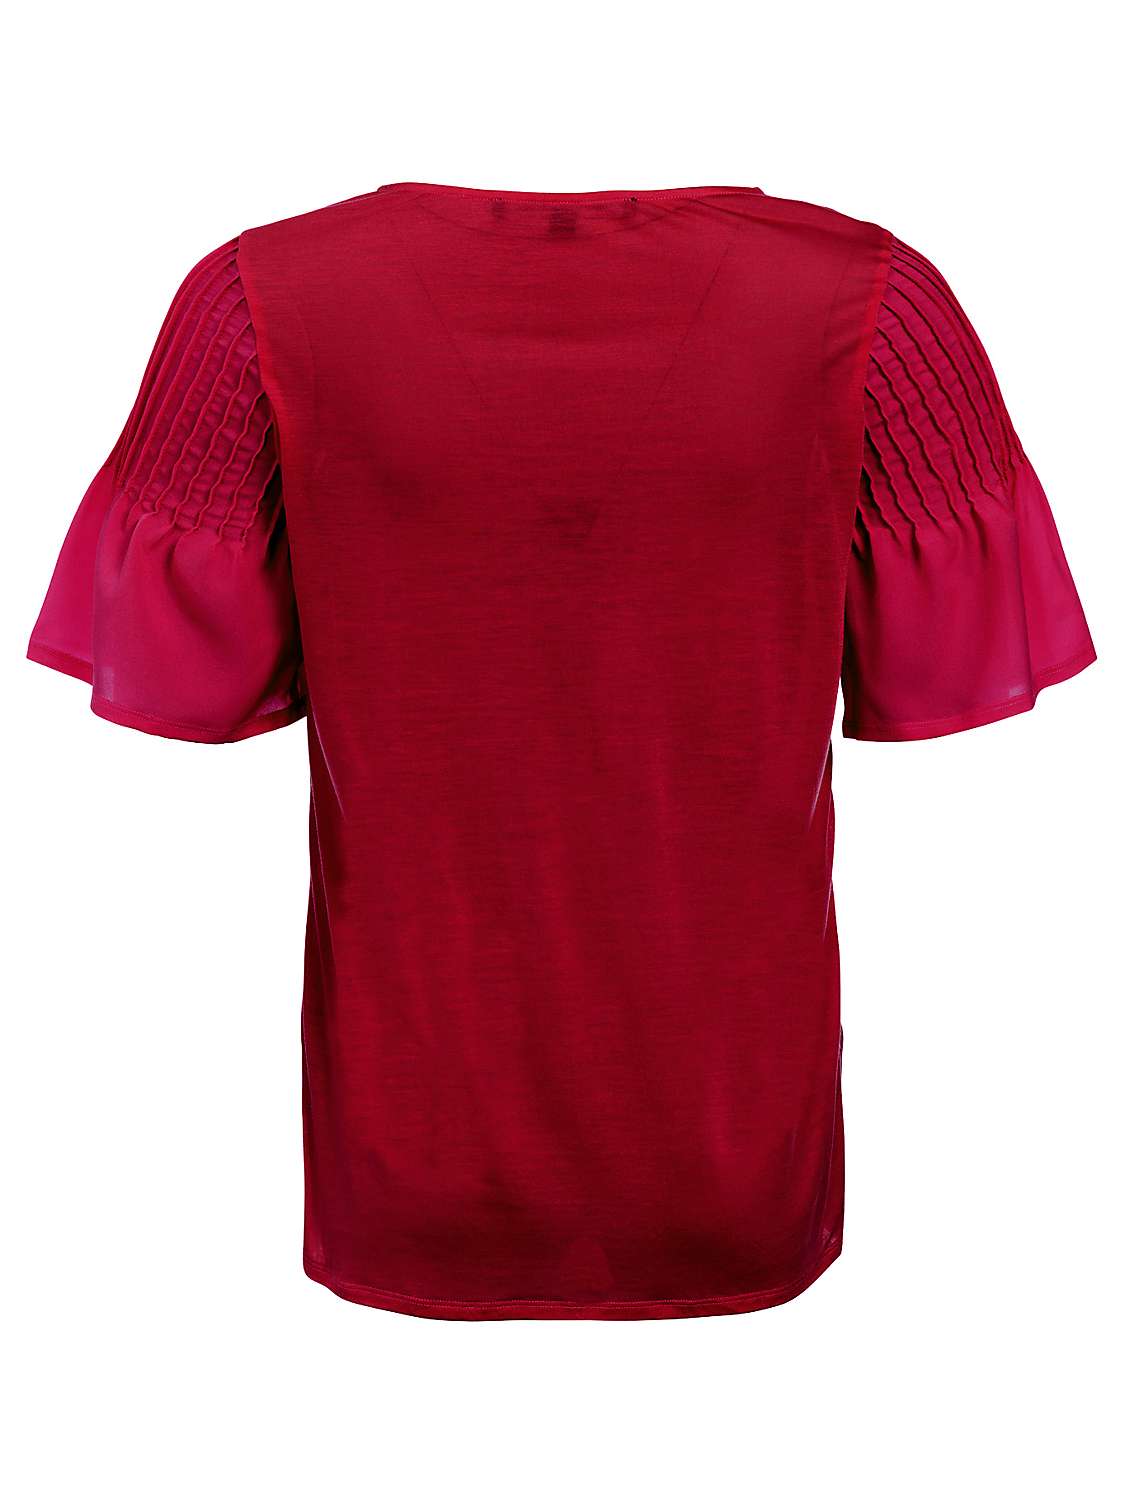 Buy French Connection Classic Crepe Top, Magenta Haze Online at johnlewis.com